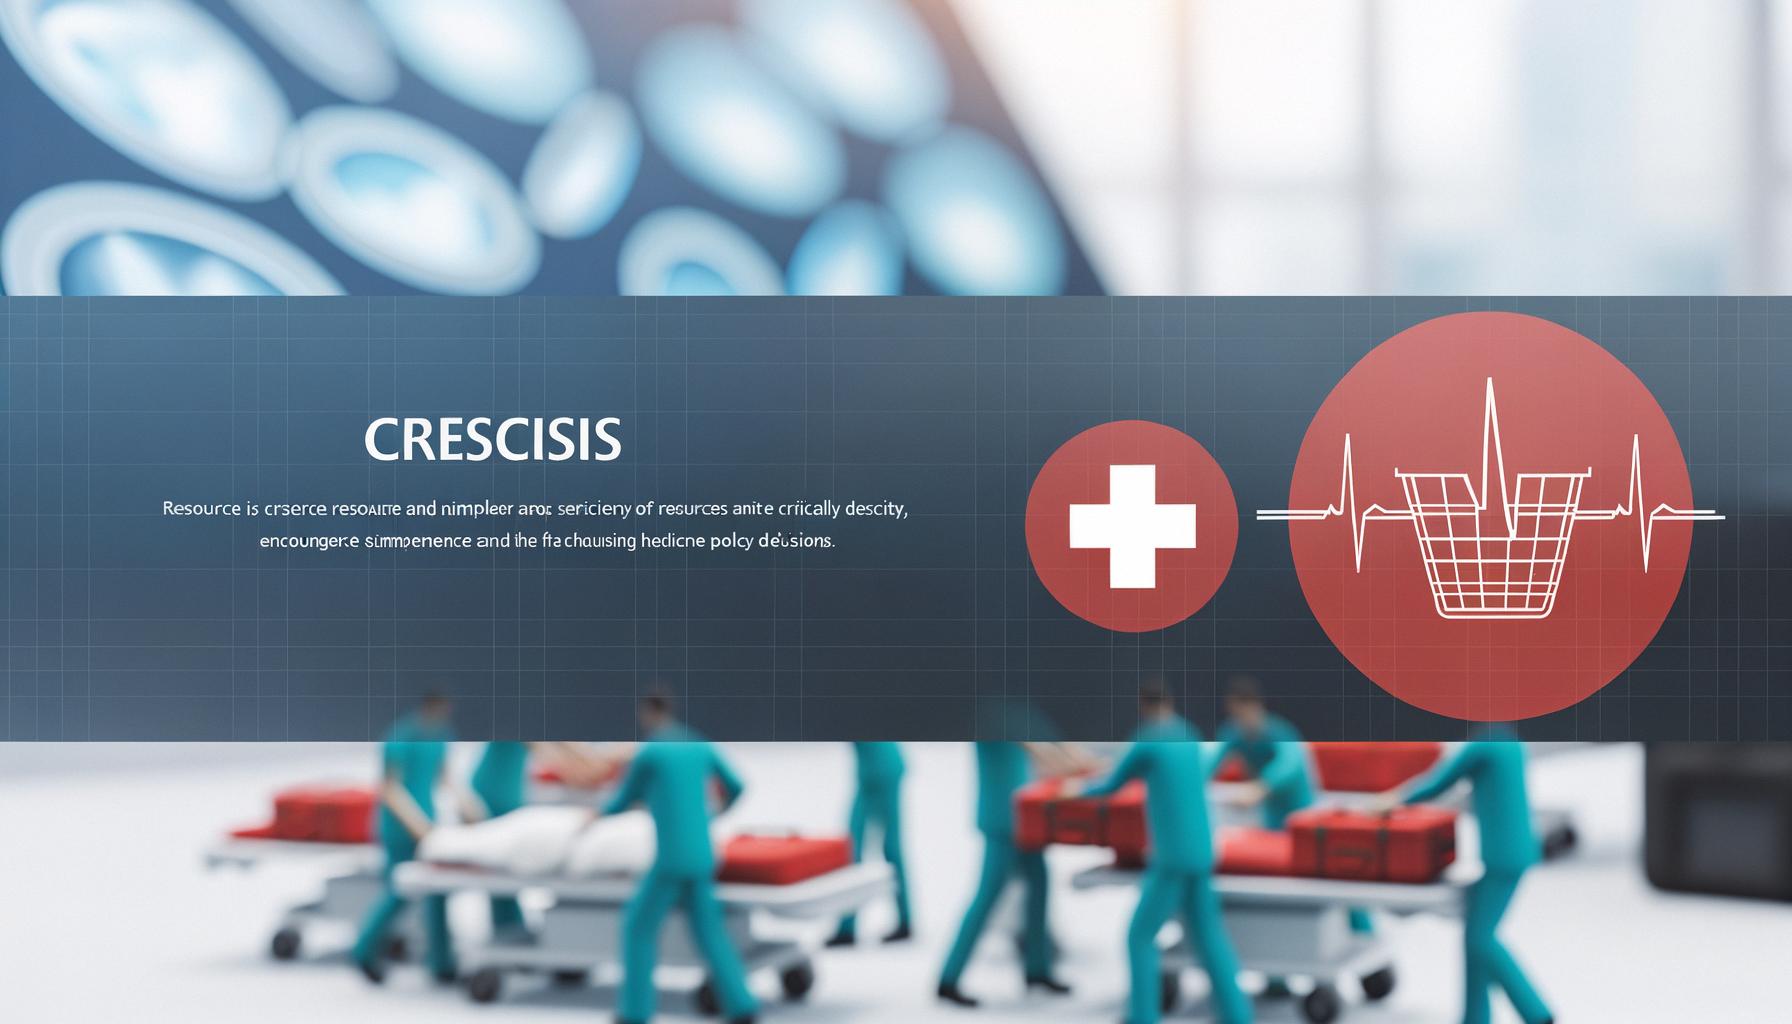 Emergency medicine under crises of resources and policy Balanced News